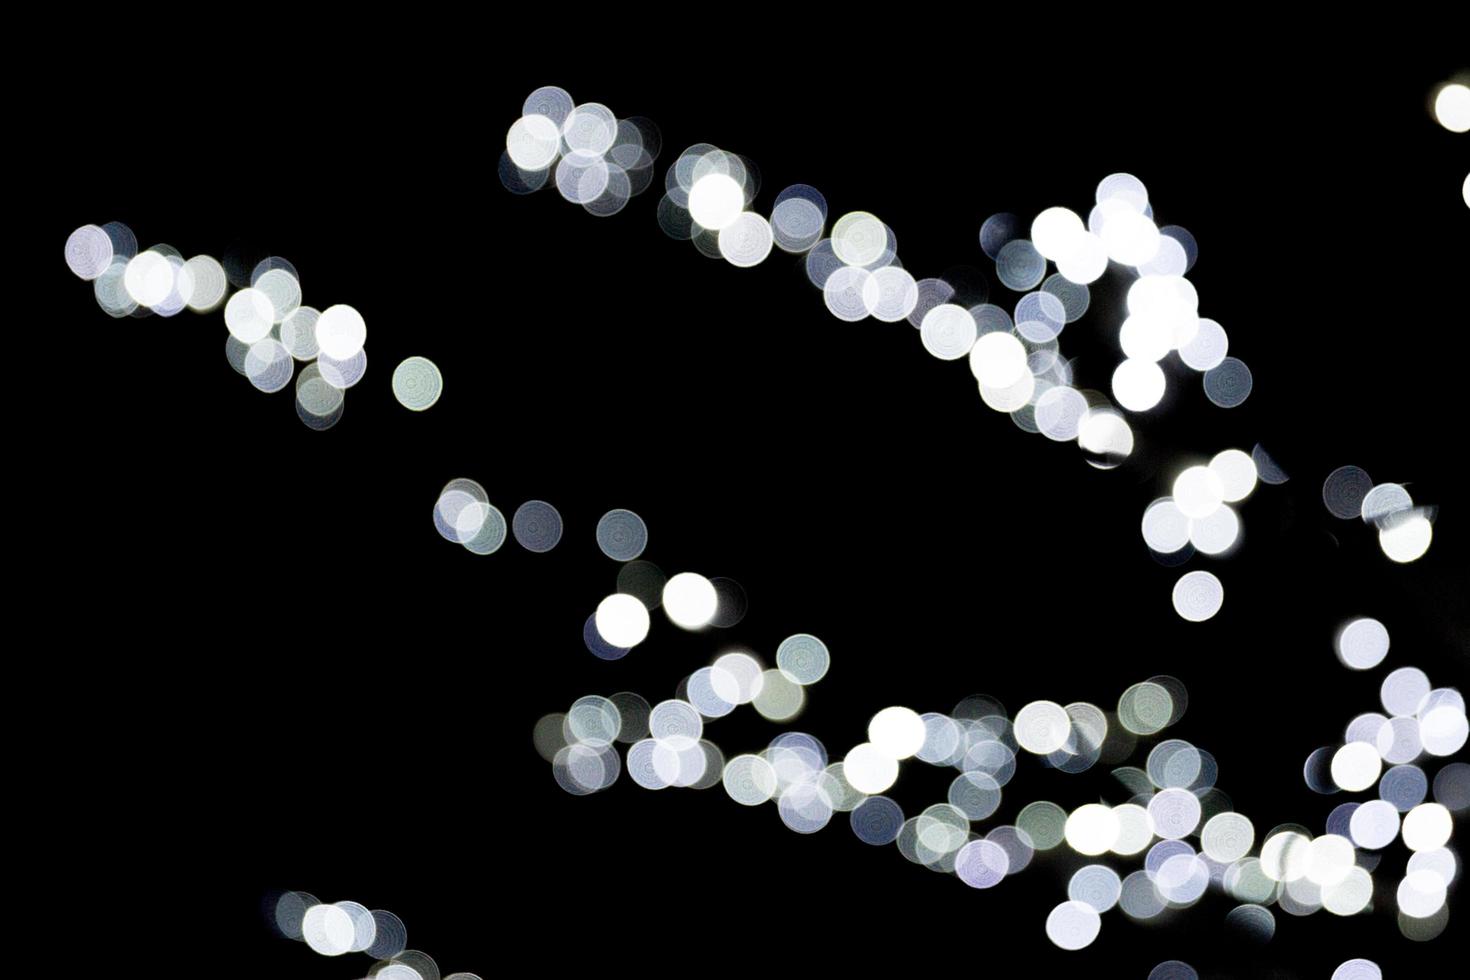 Abstract blur black and white bokeh background. many round light on background photo